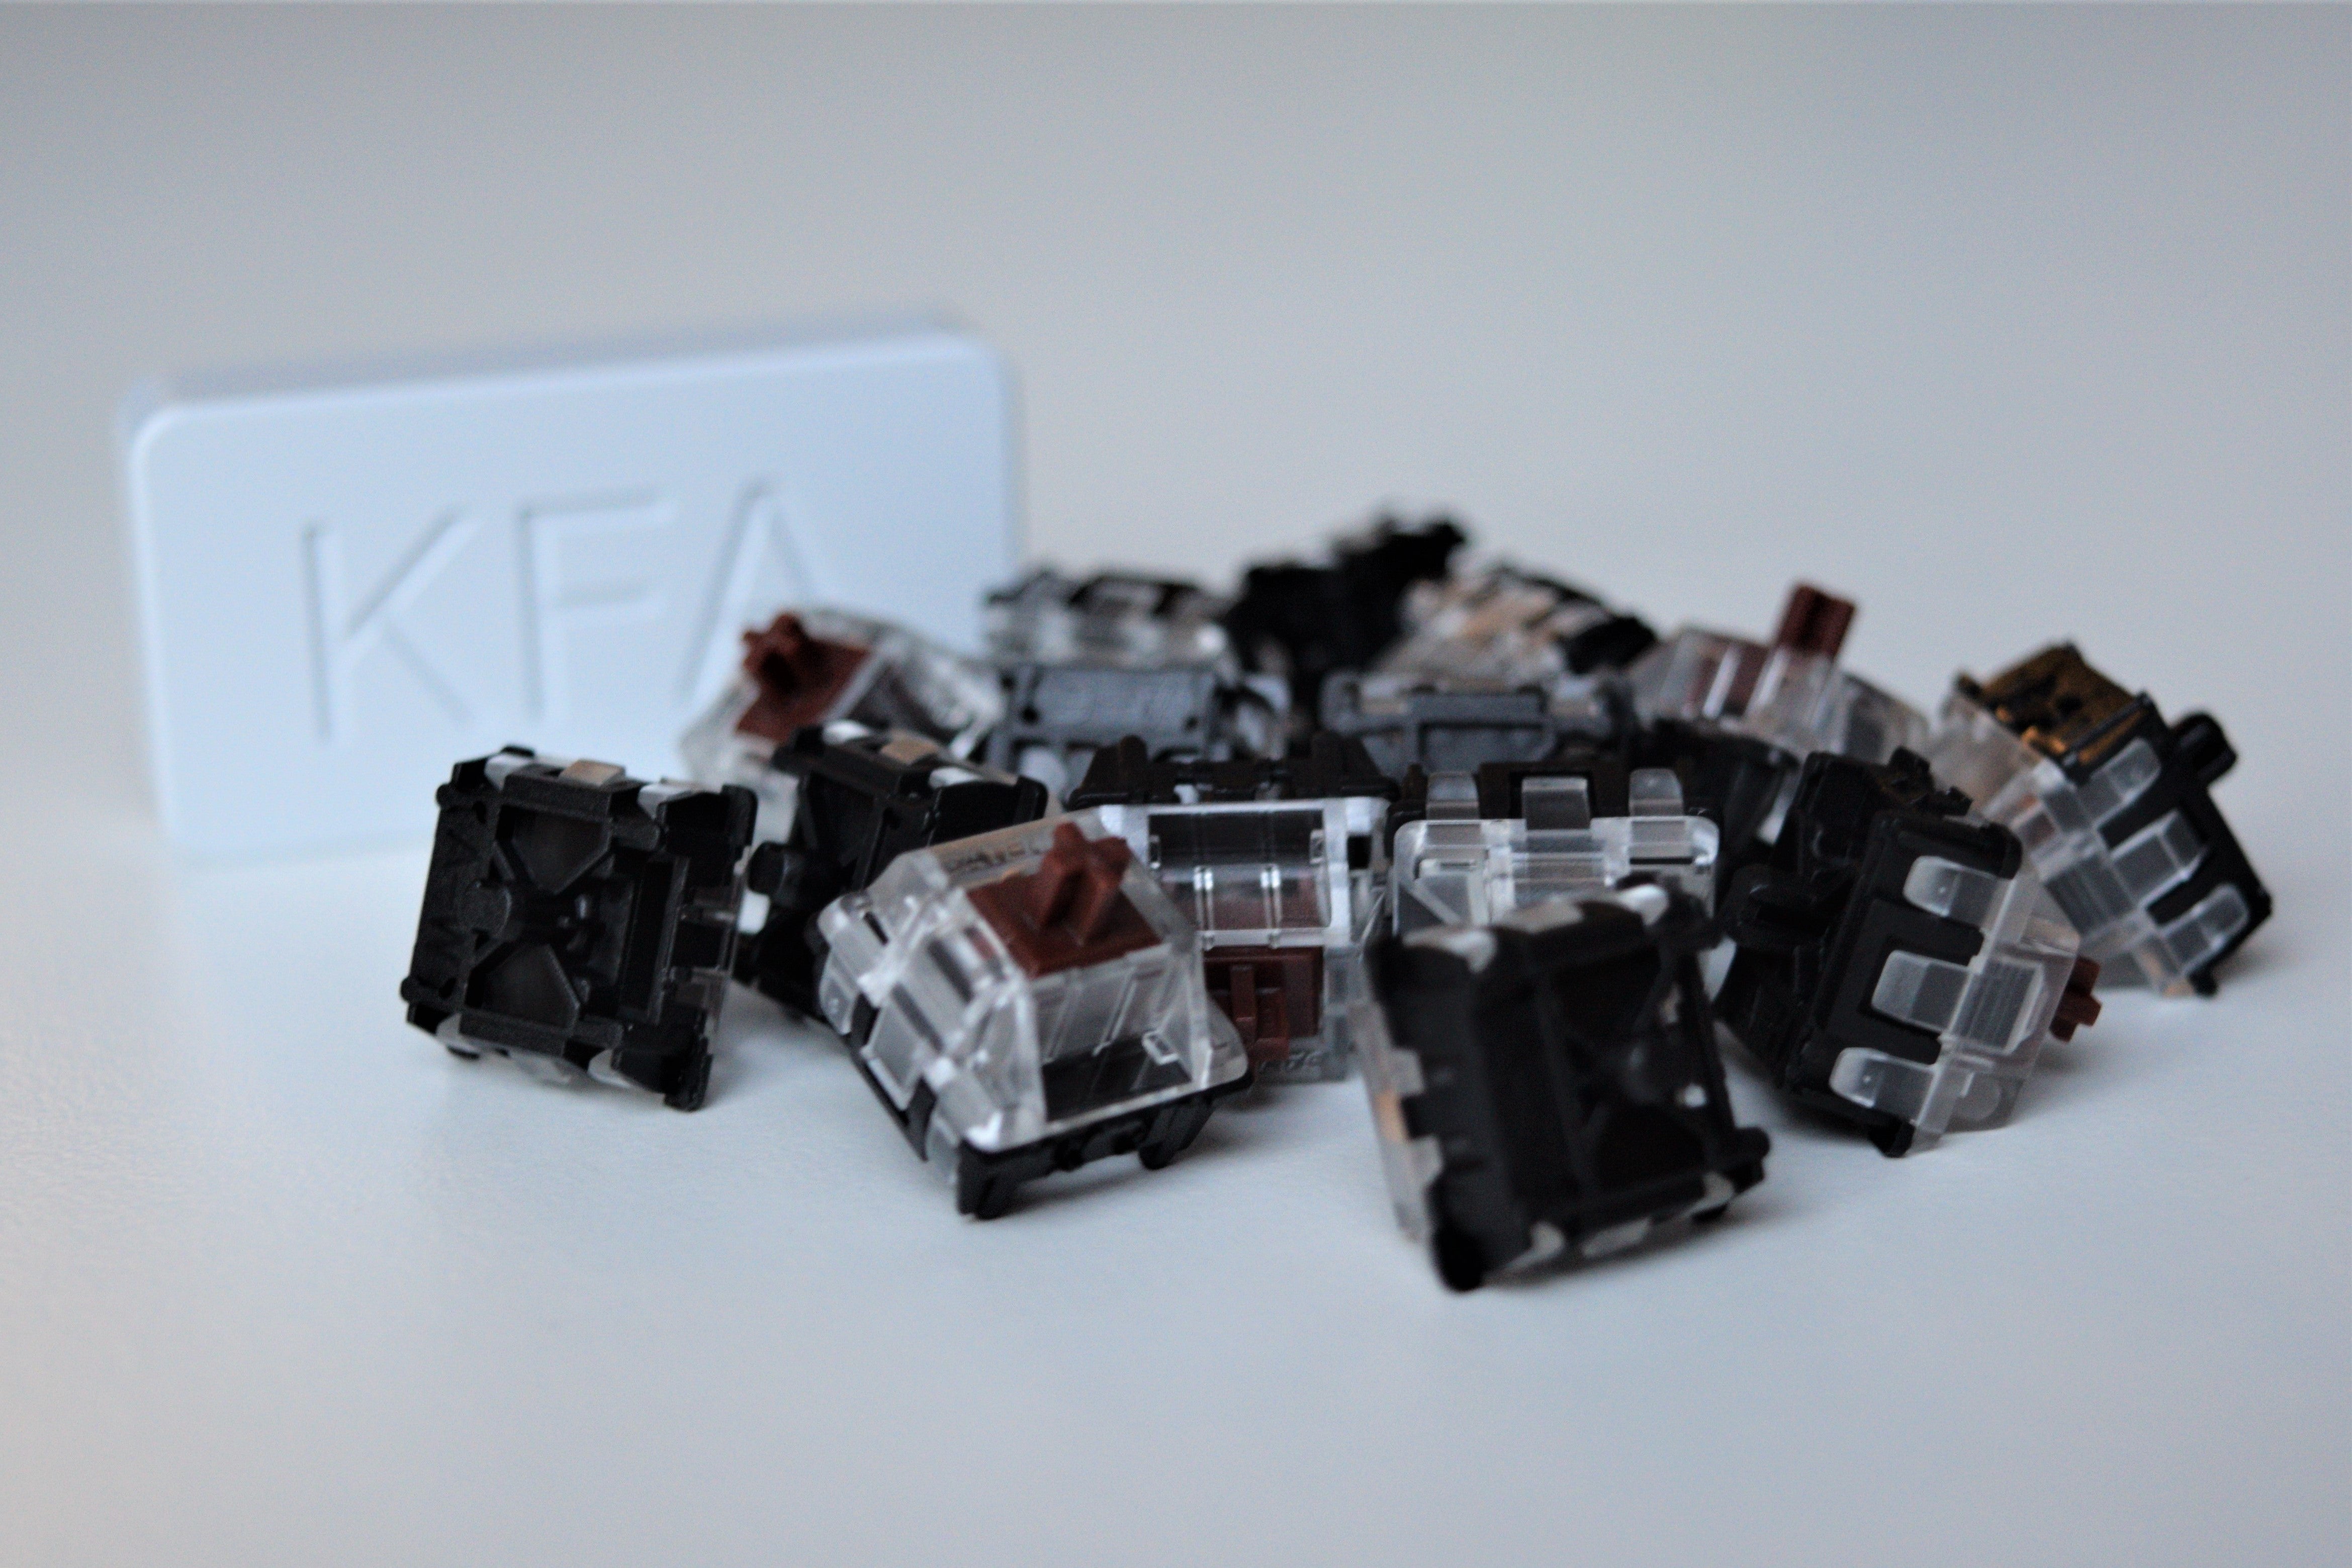 Gateron Optical Brown Group View with KFA branding out of focus